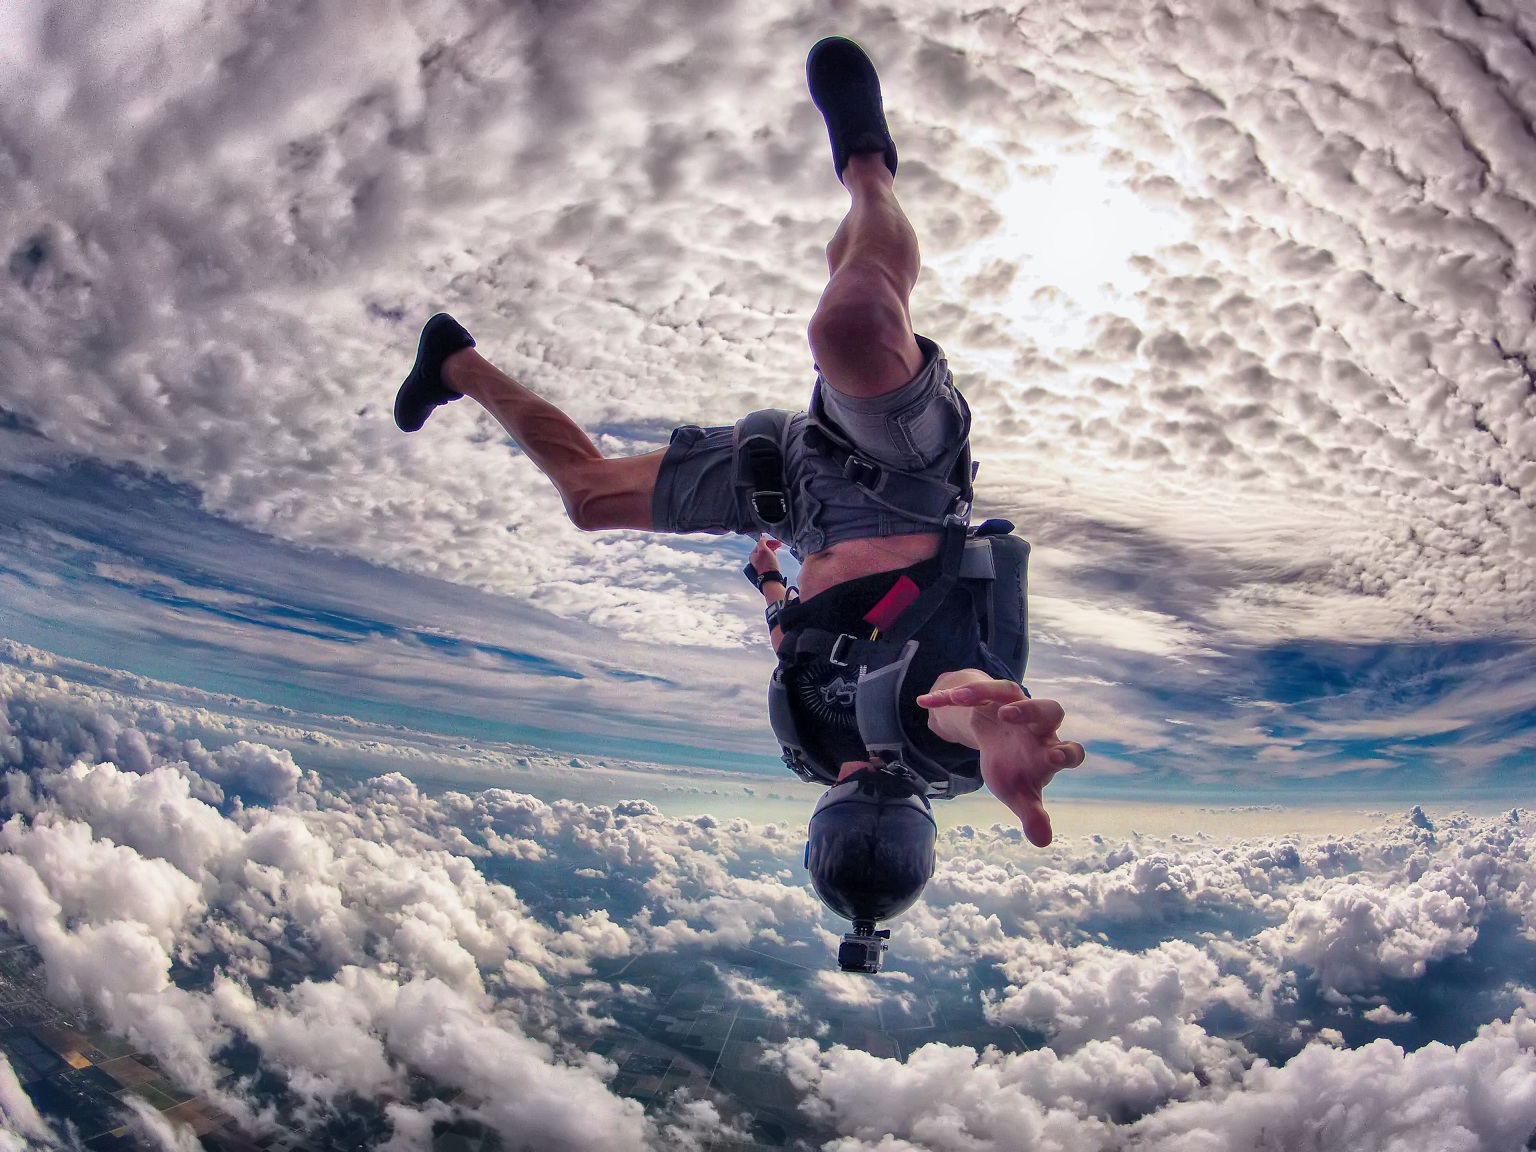 very amazing skydiving image